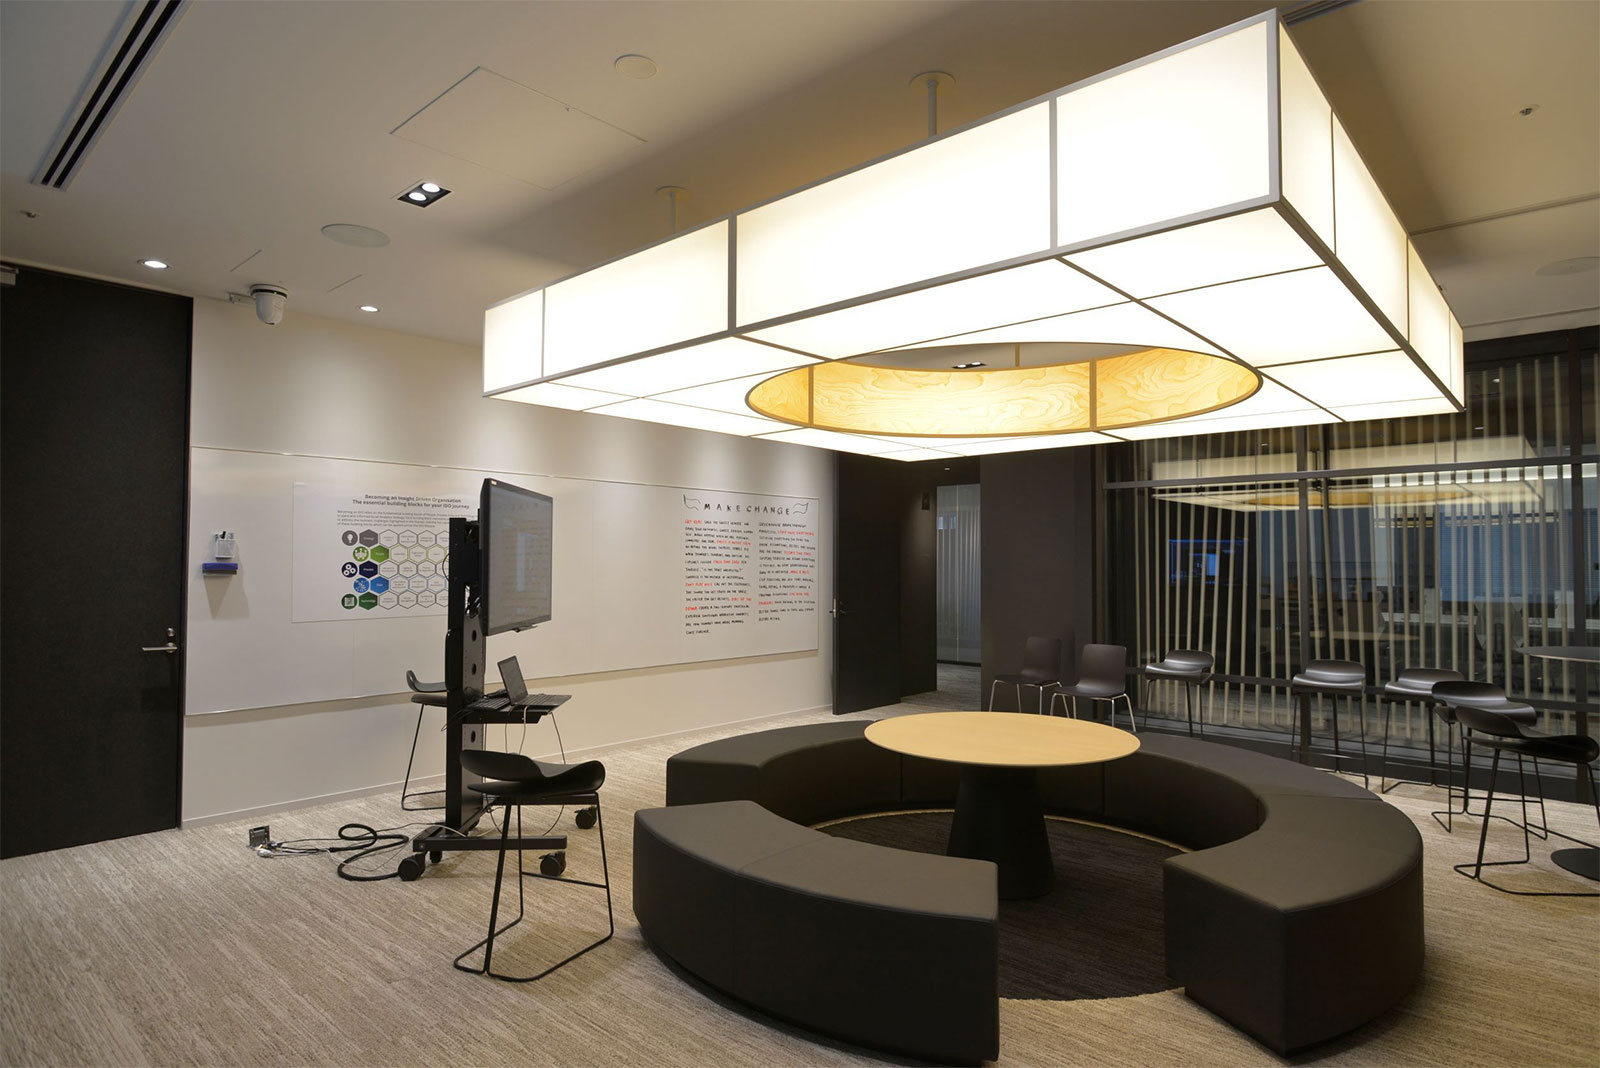 The "harmony room" has a friendly atmosphere created by a large Japanese-style light in the center.